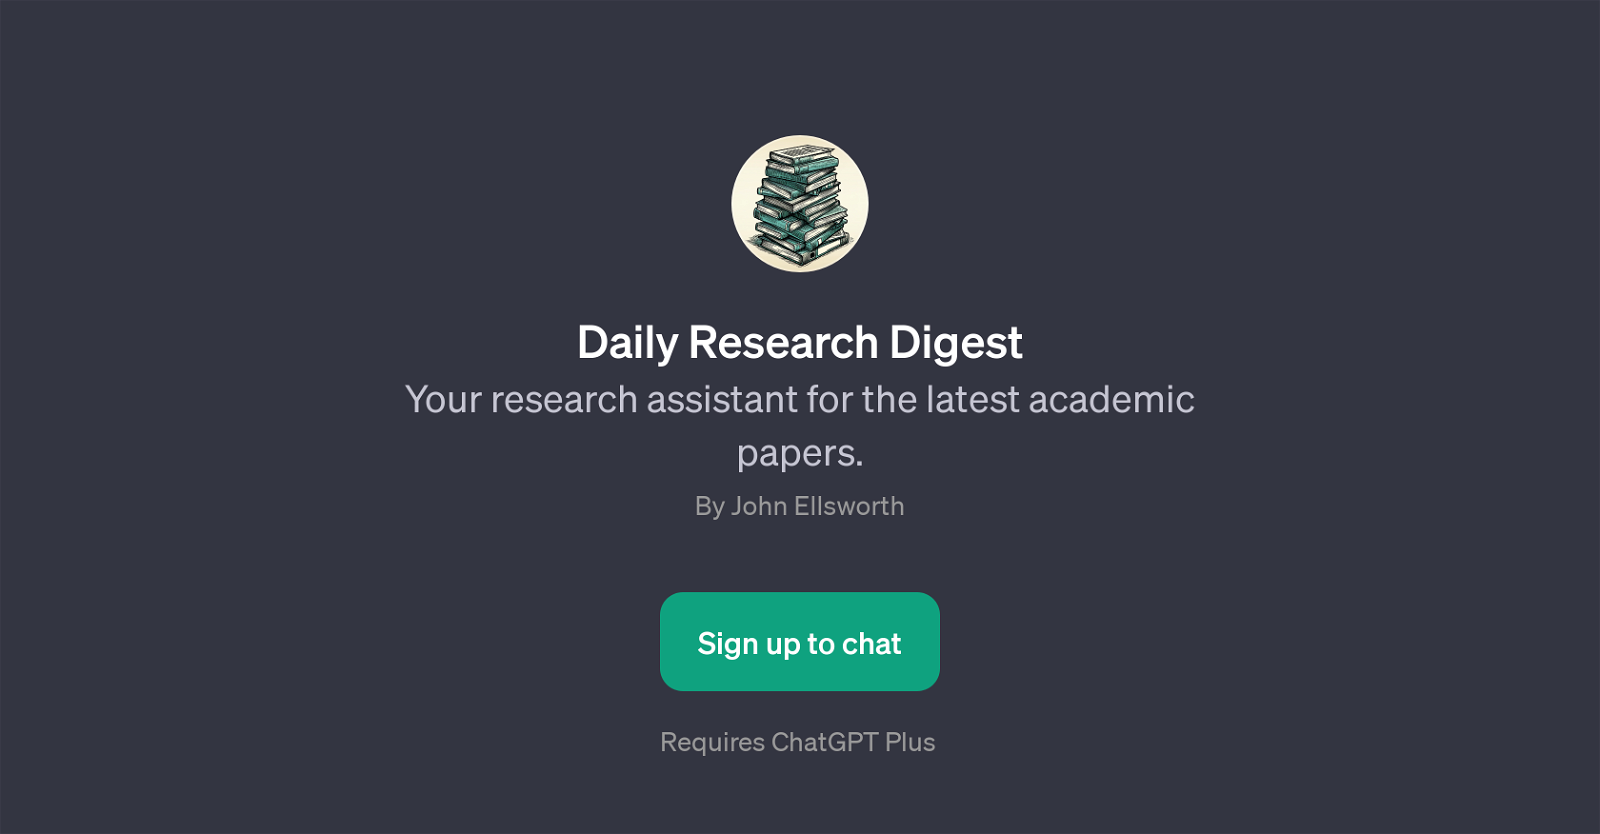 Daily Research Digest website